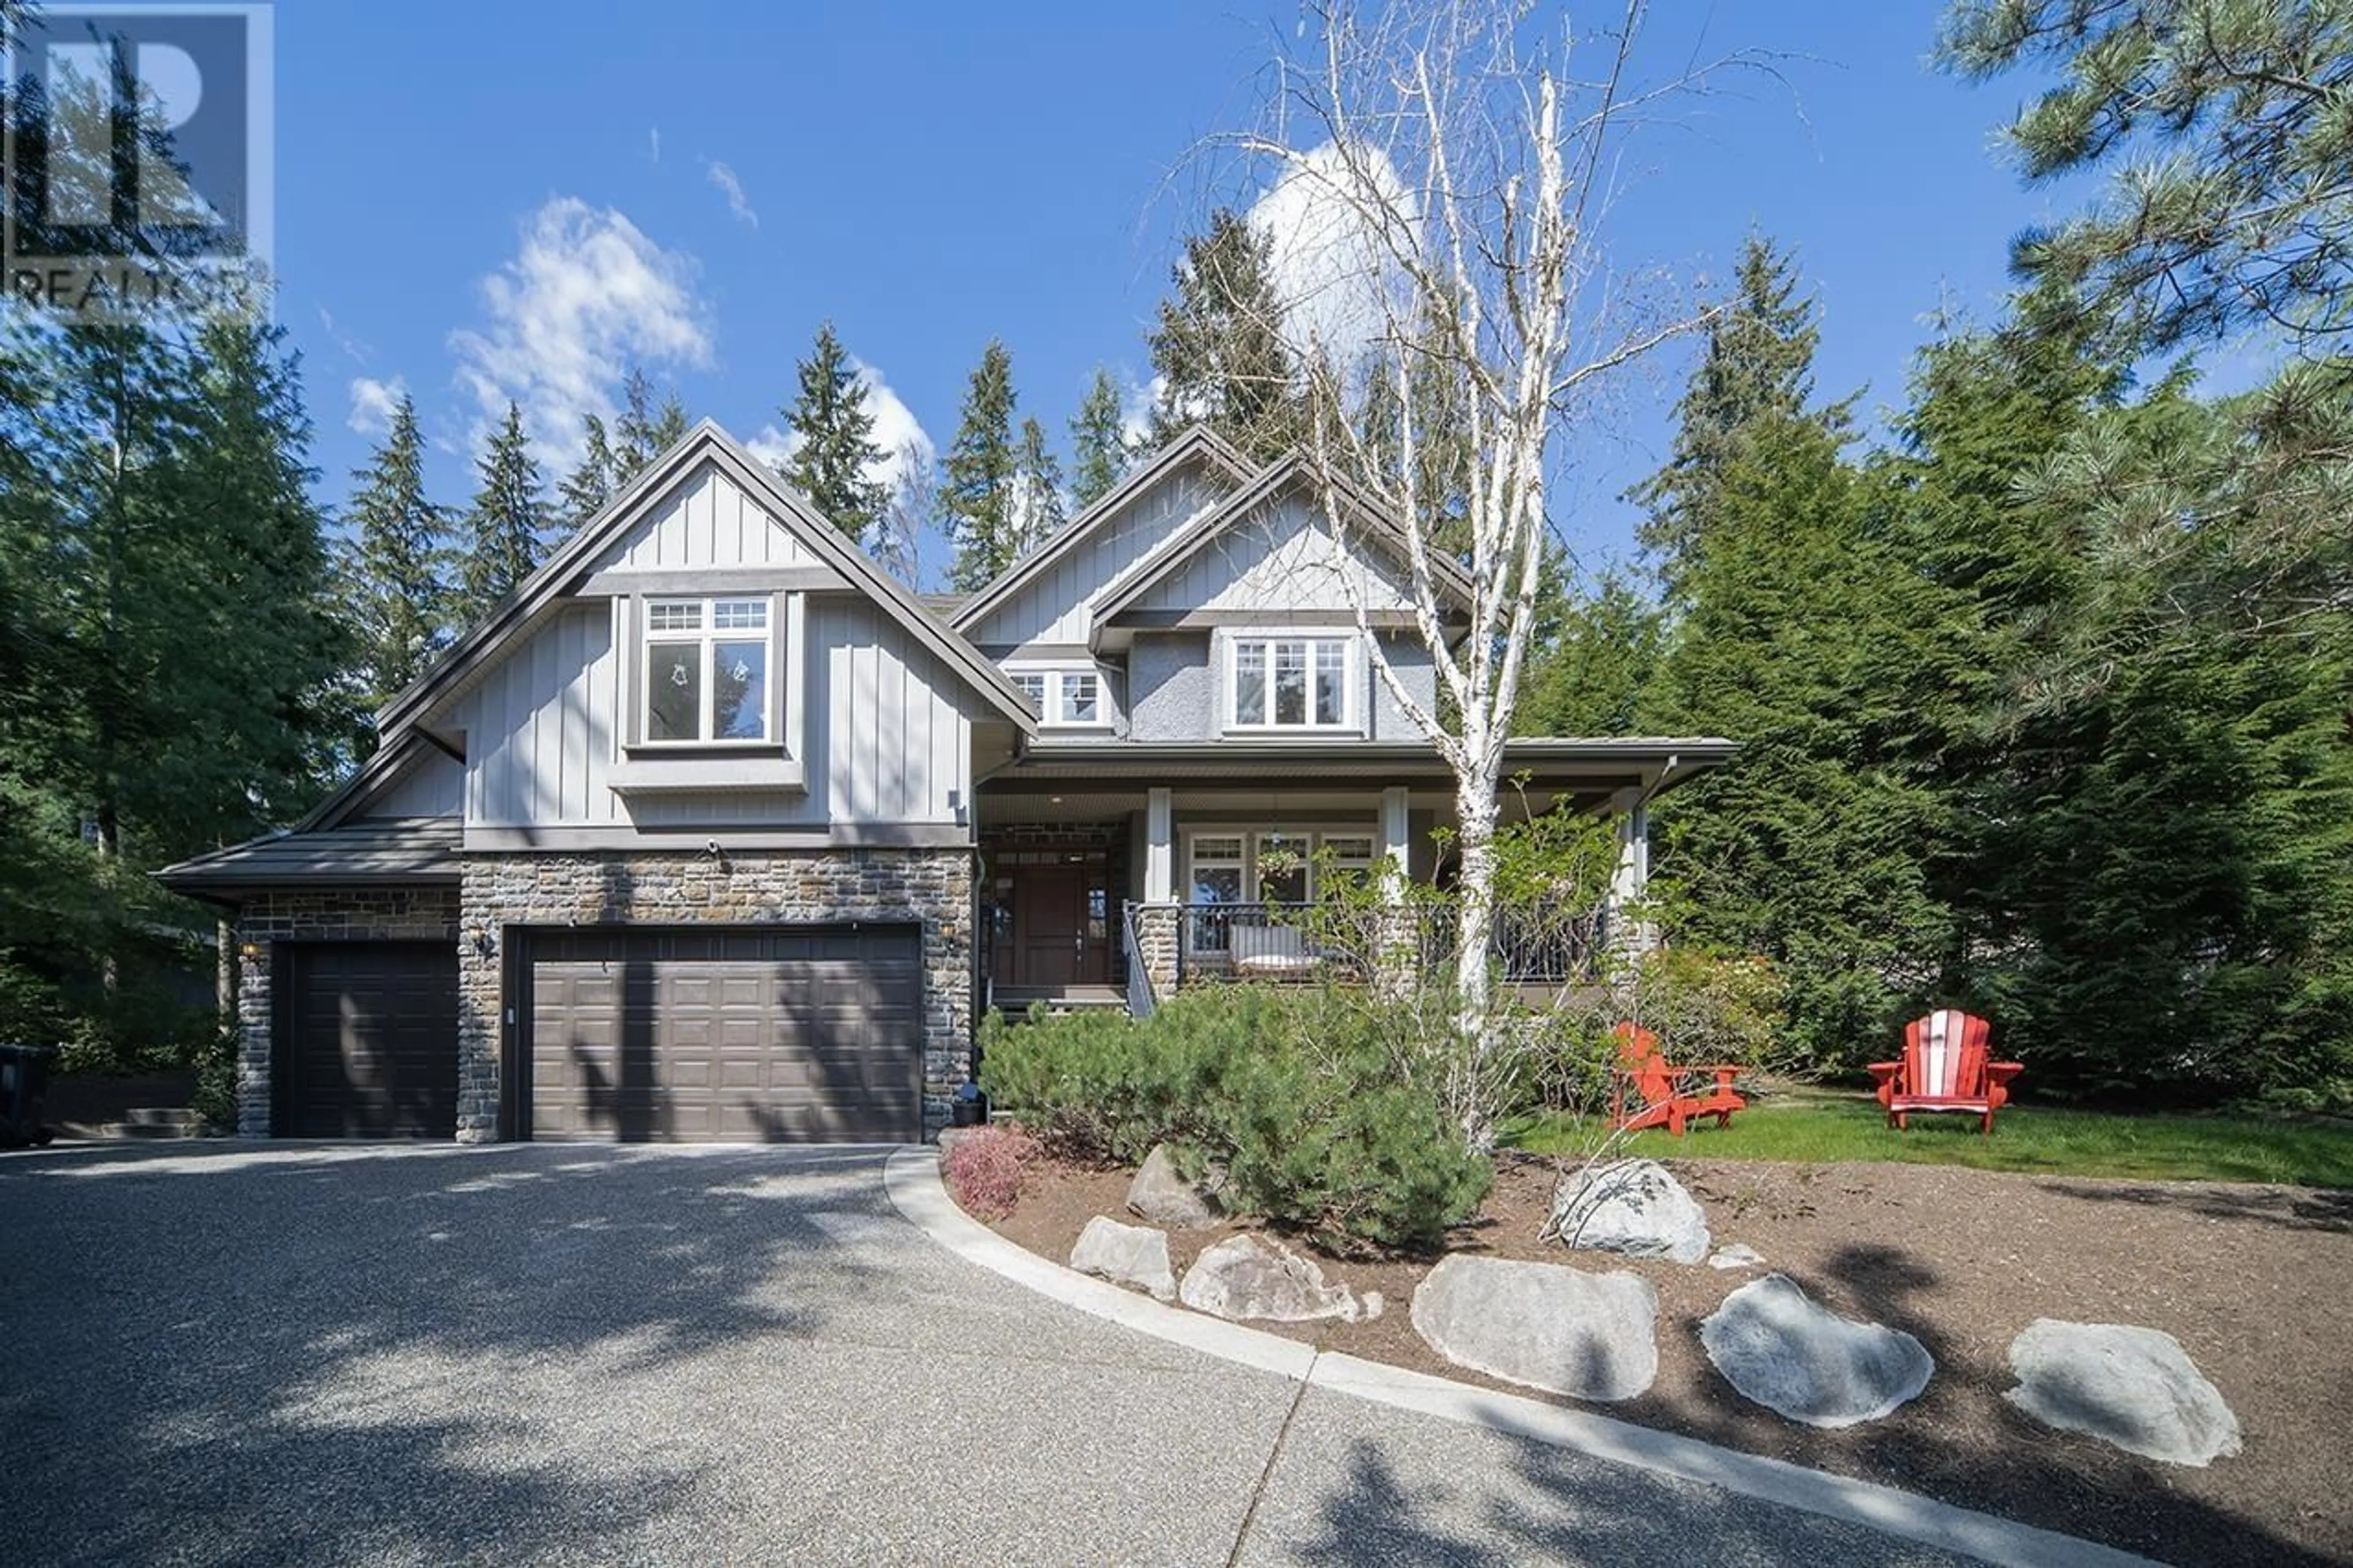 Cottage for 1045 RAVENSWOOD DRIVE, Anmore British Columbia V3H5M6